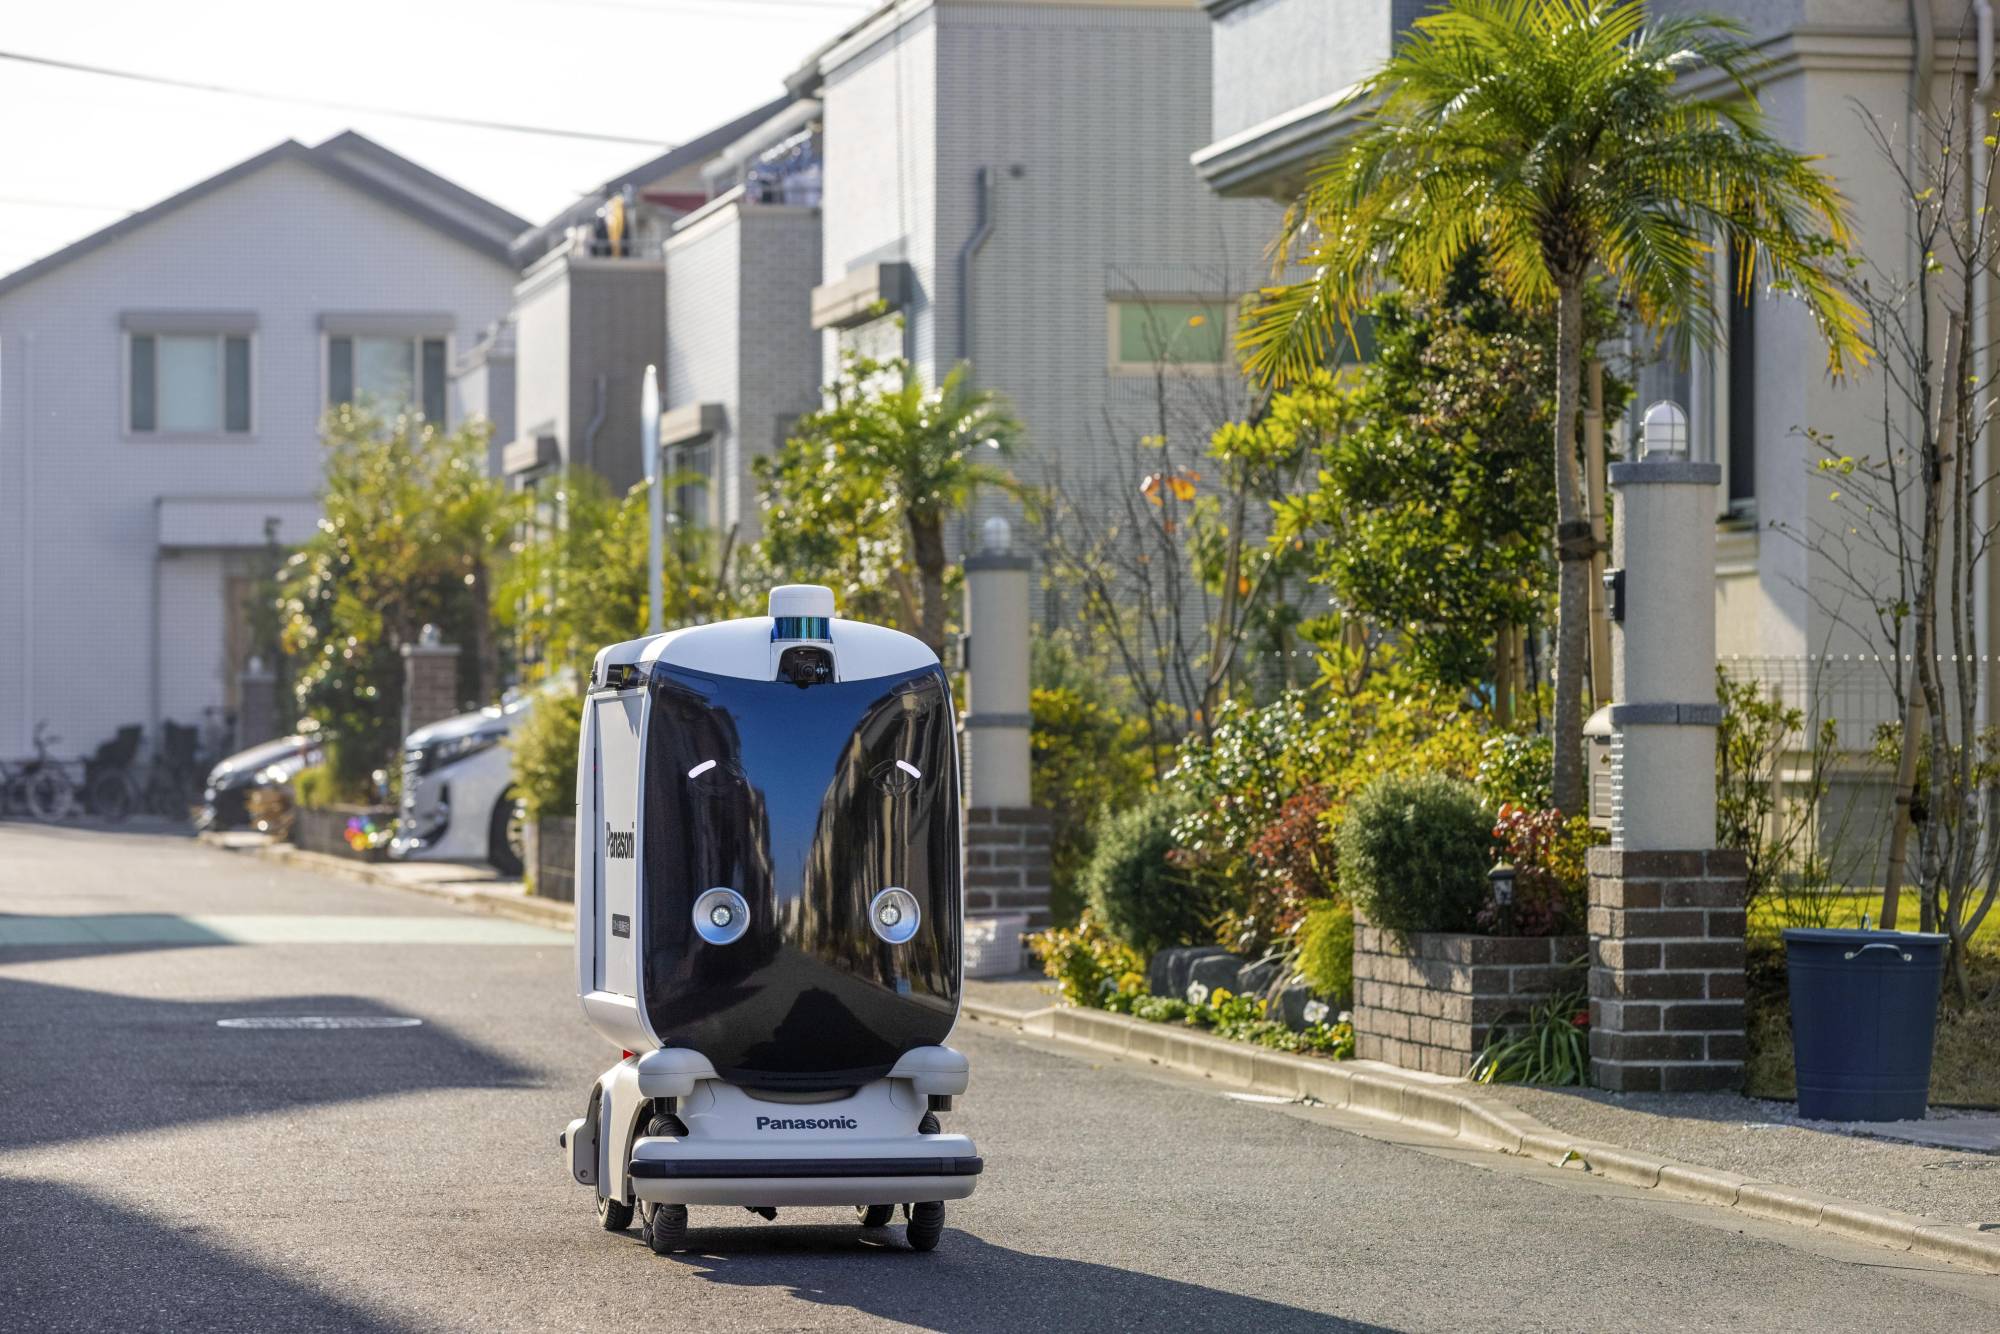 Panasonic trial self-driving home delivery robot in February | The Times